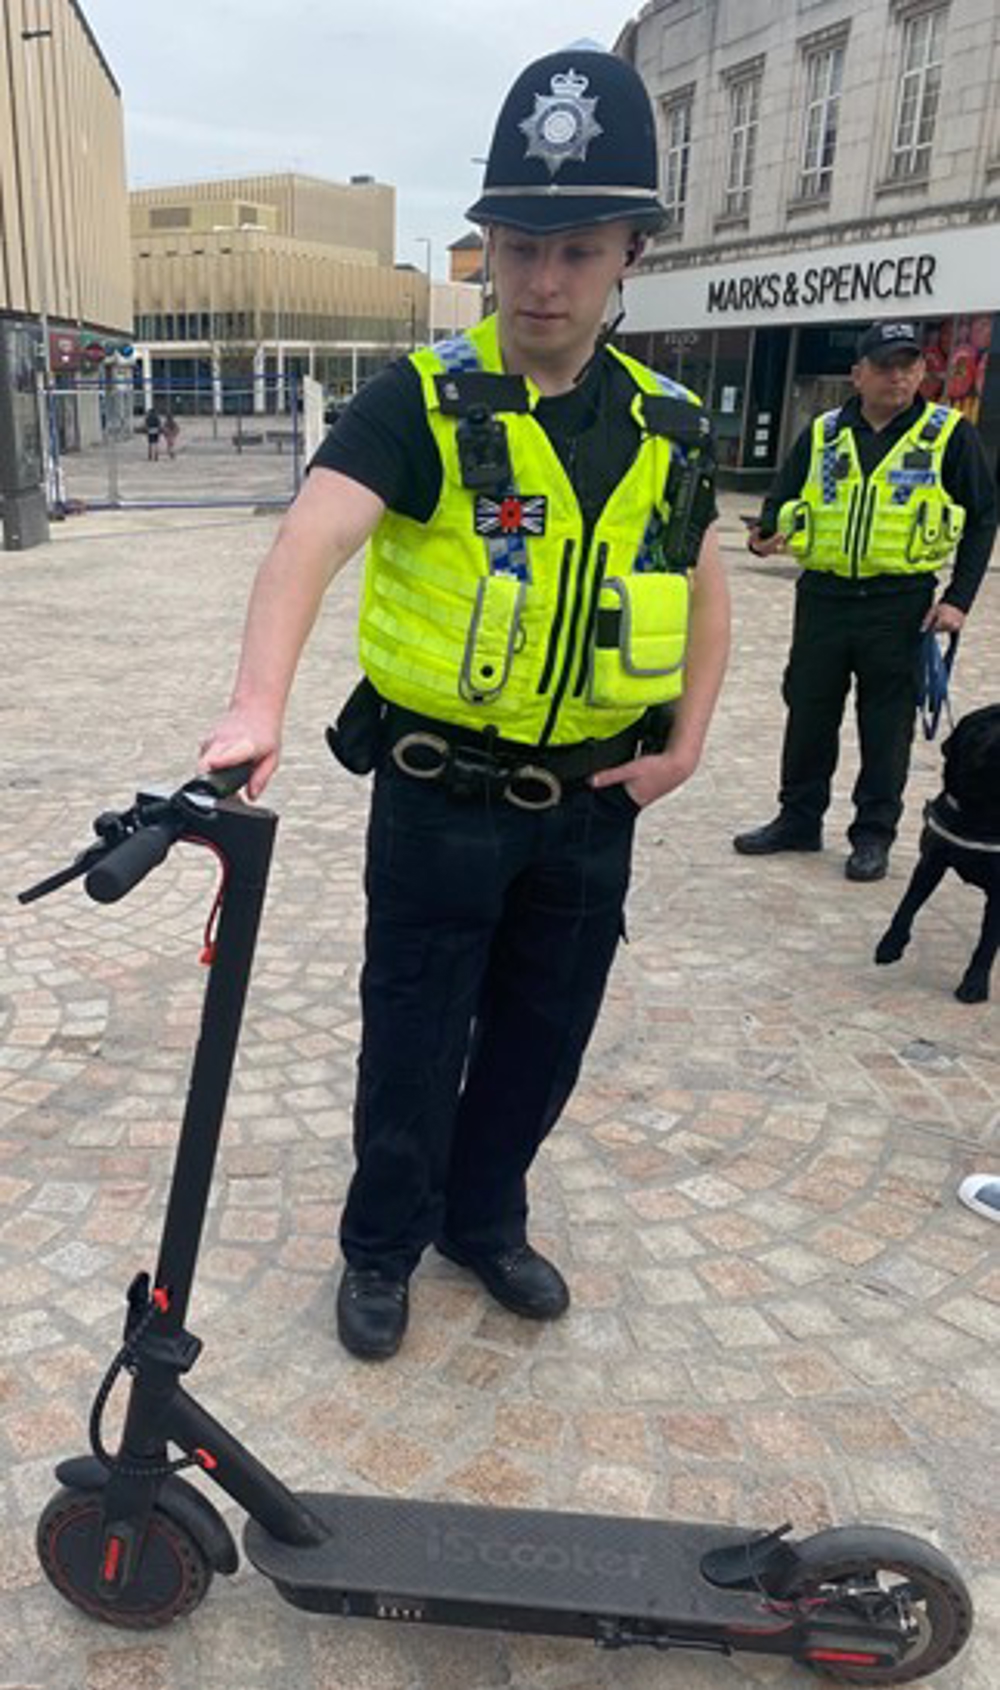 Operation Sidewinder seizes e-scooter